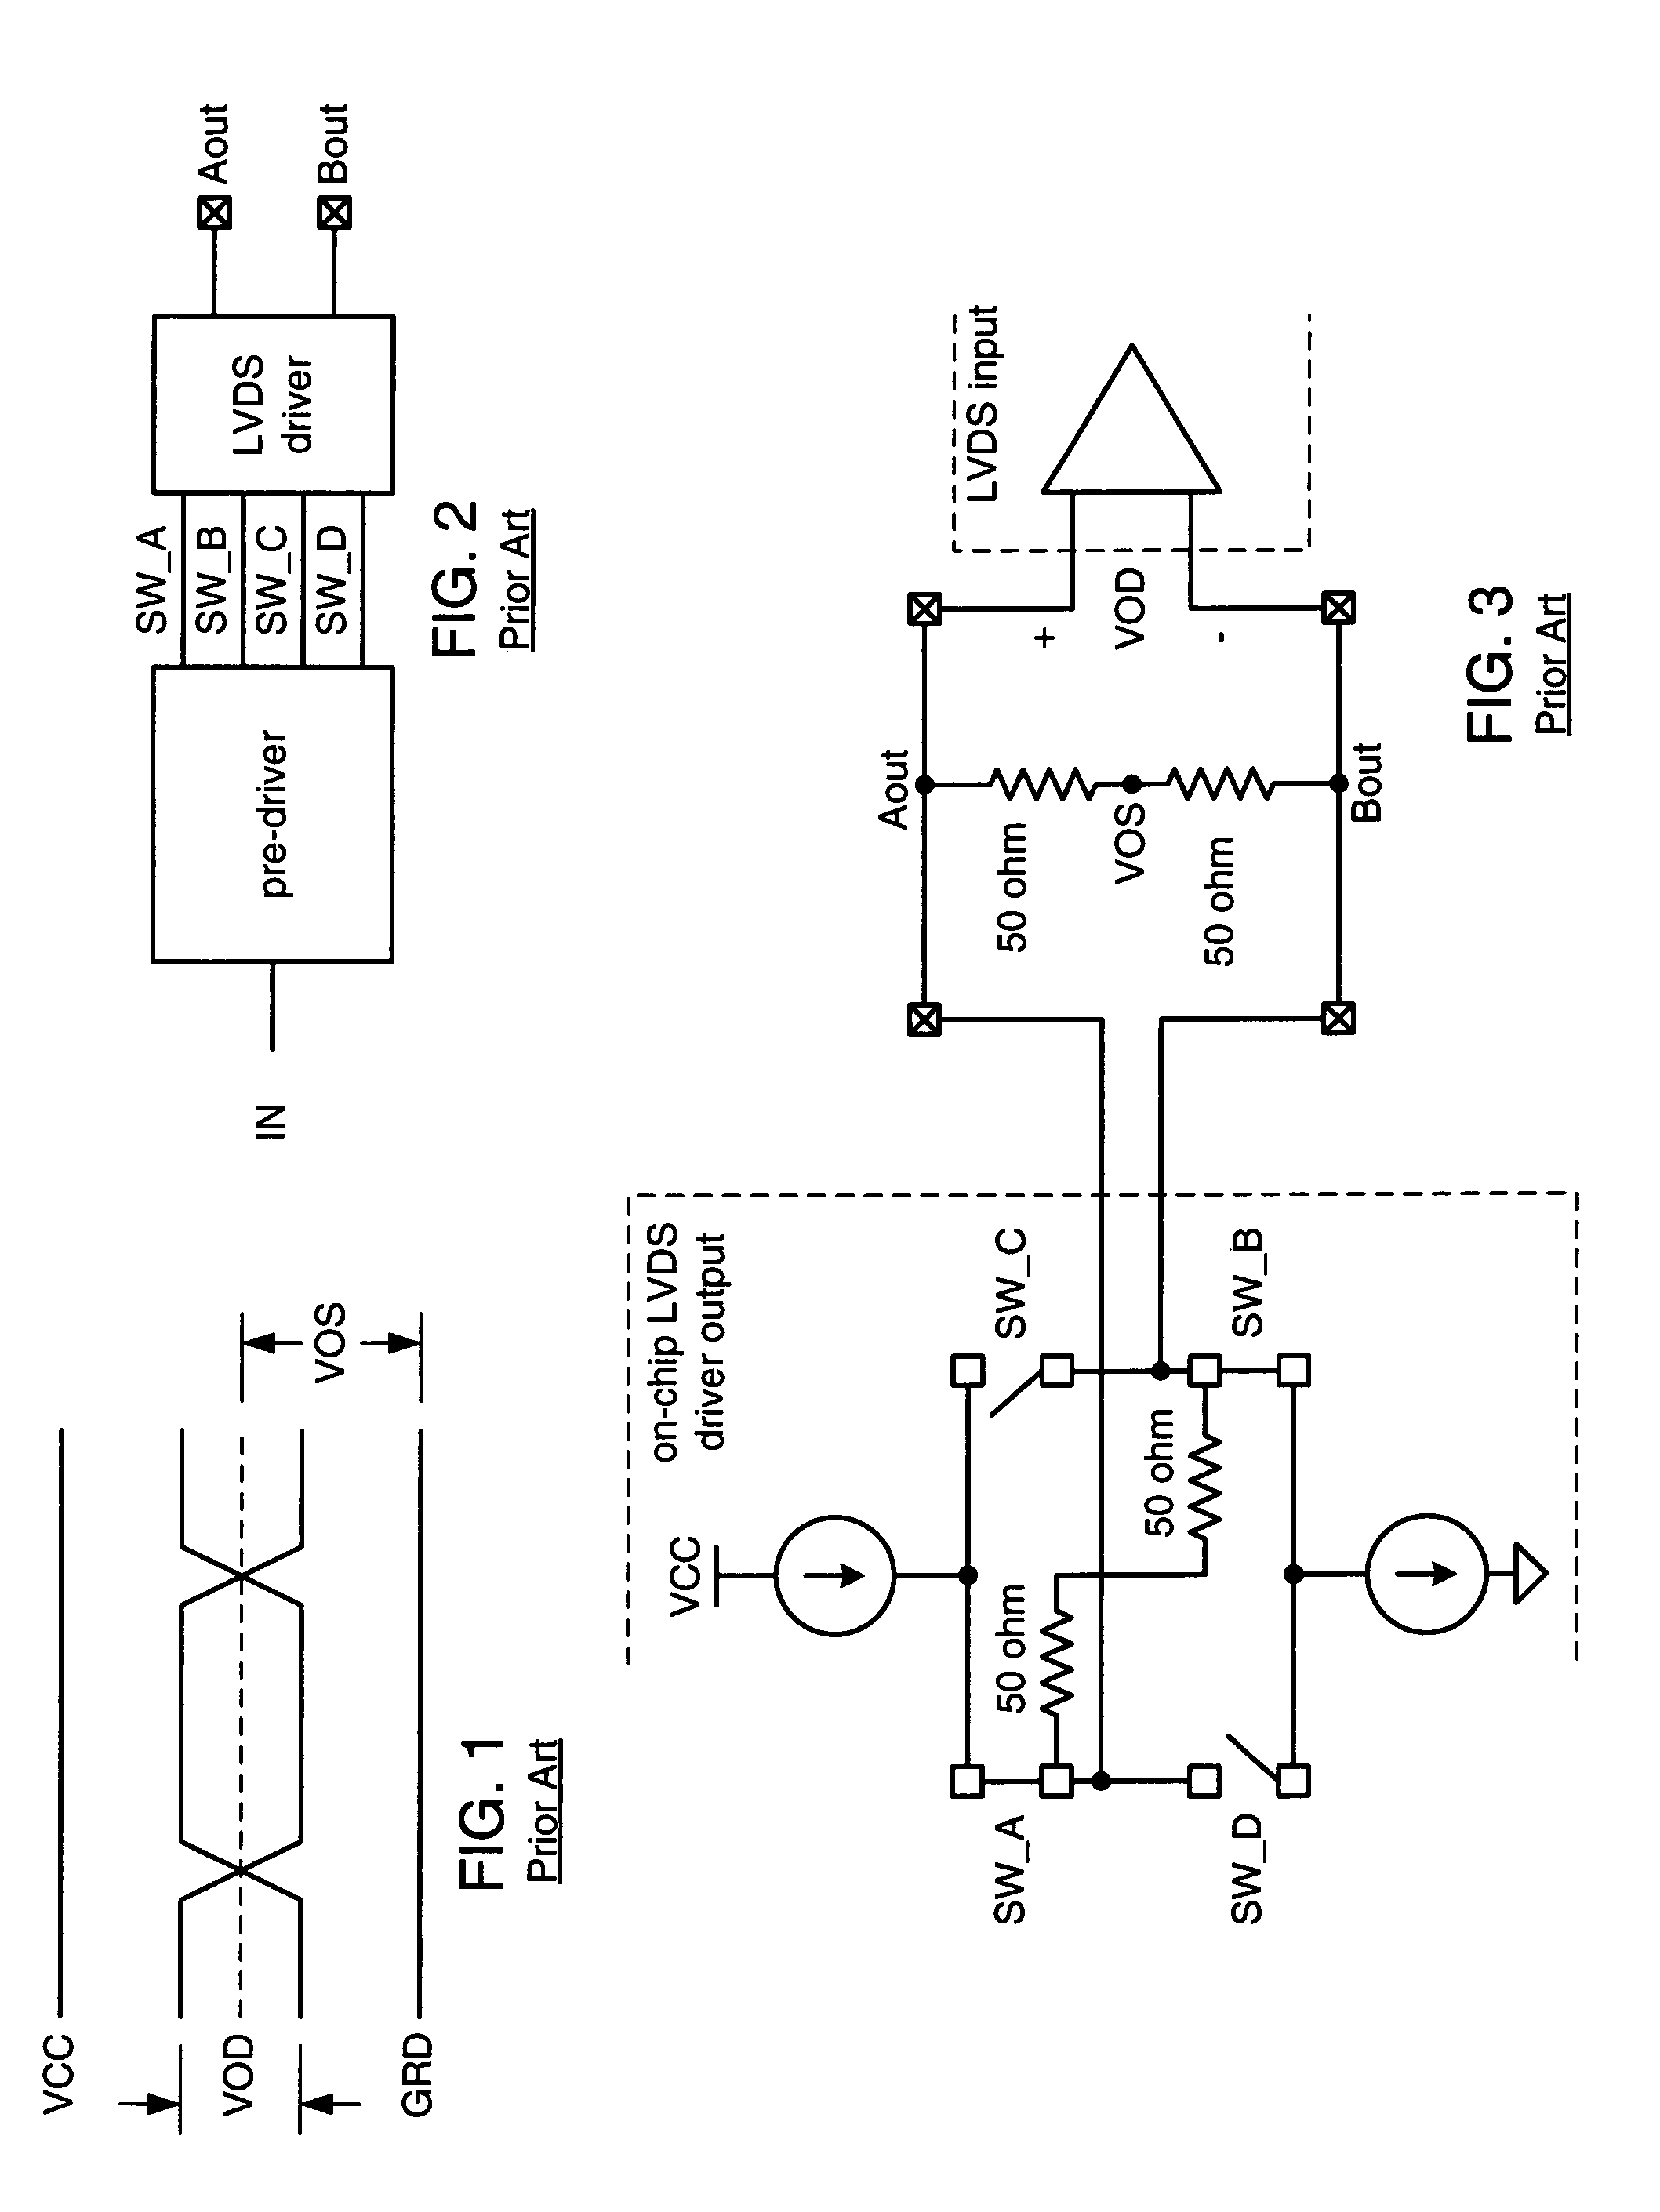 Programmable differential signaling system